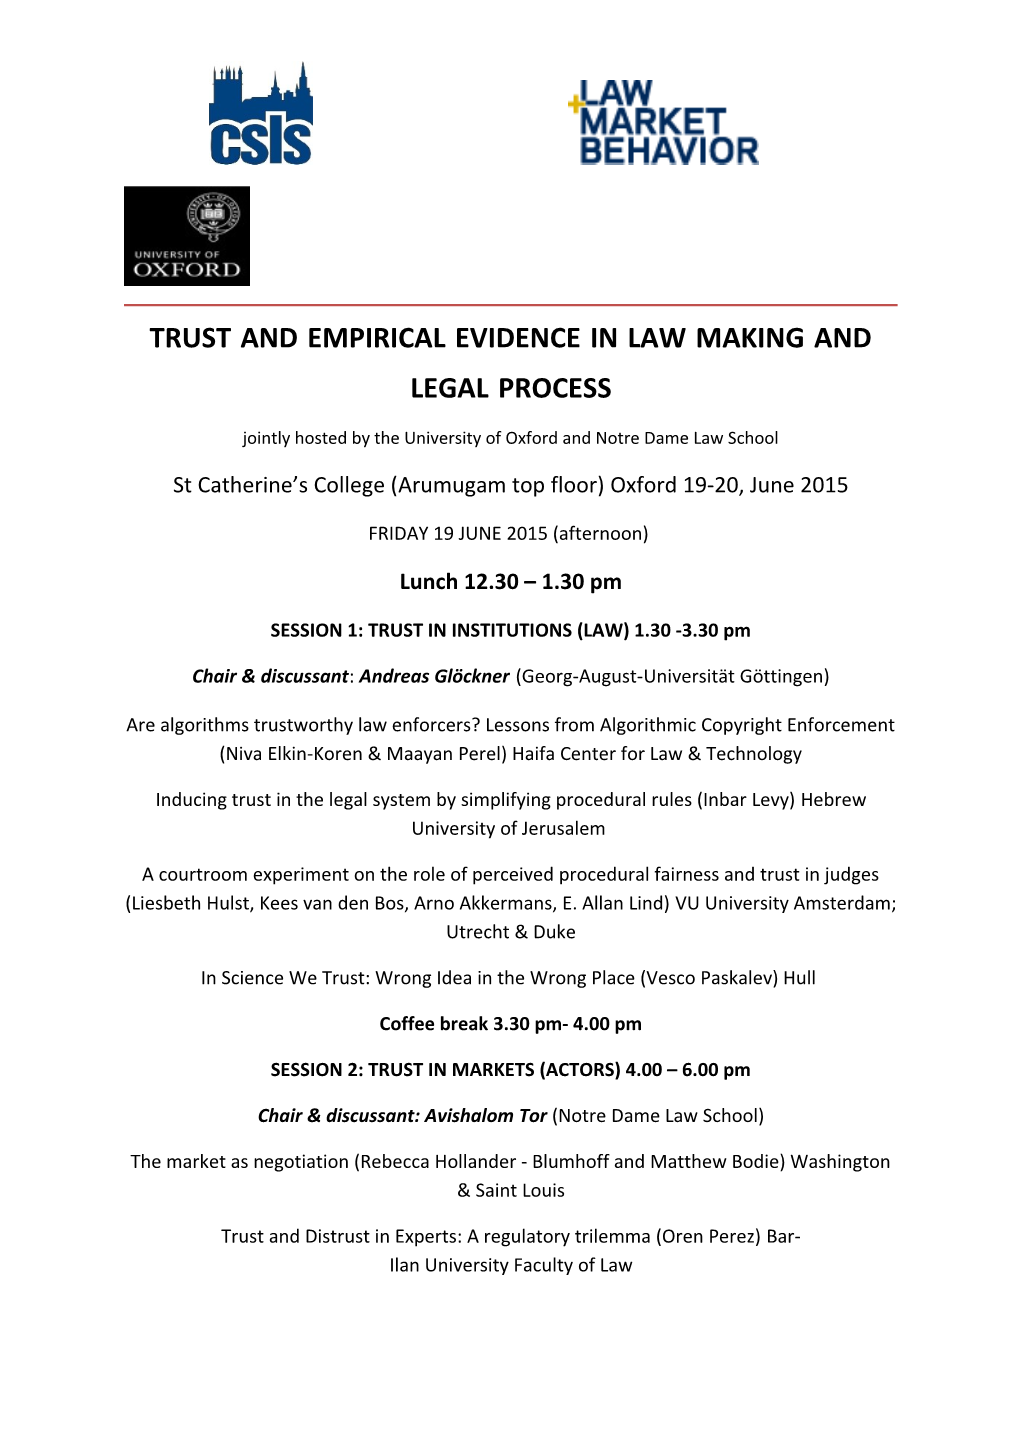 Trust and Empirical Evidence in Law Making and Legal Process